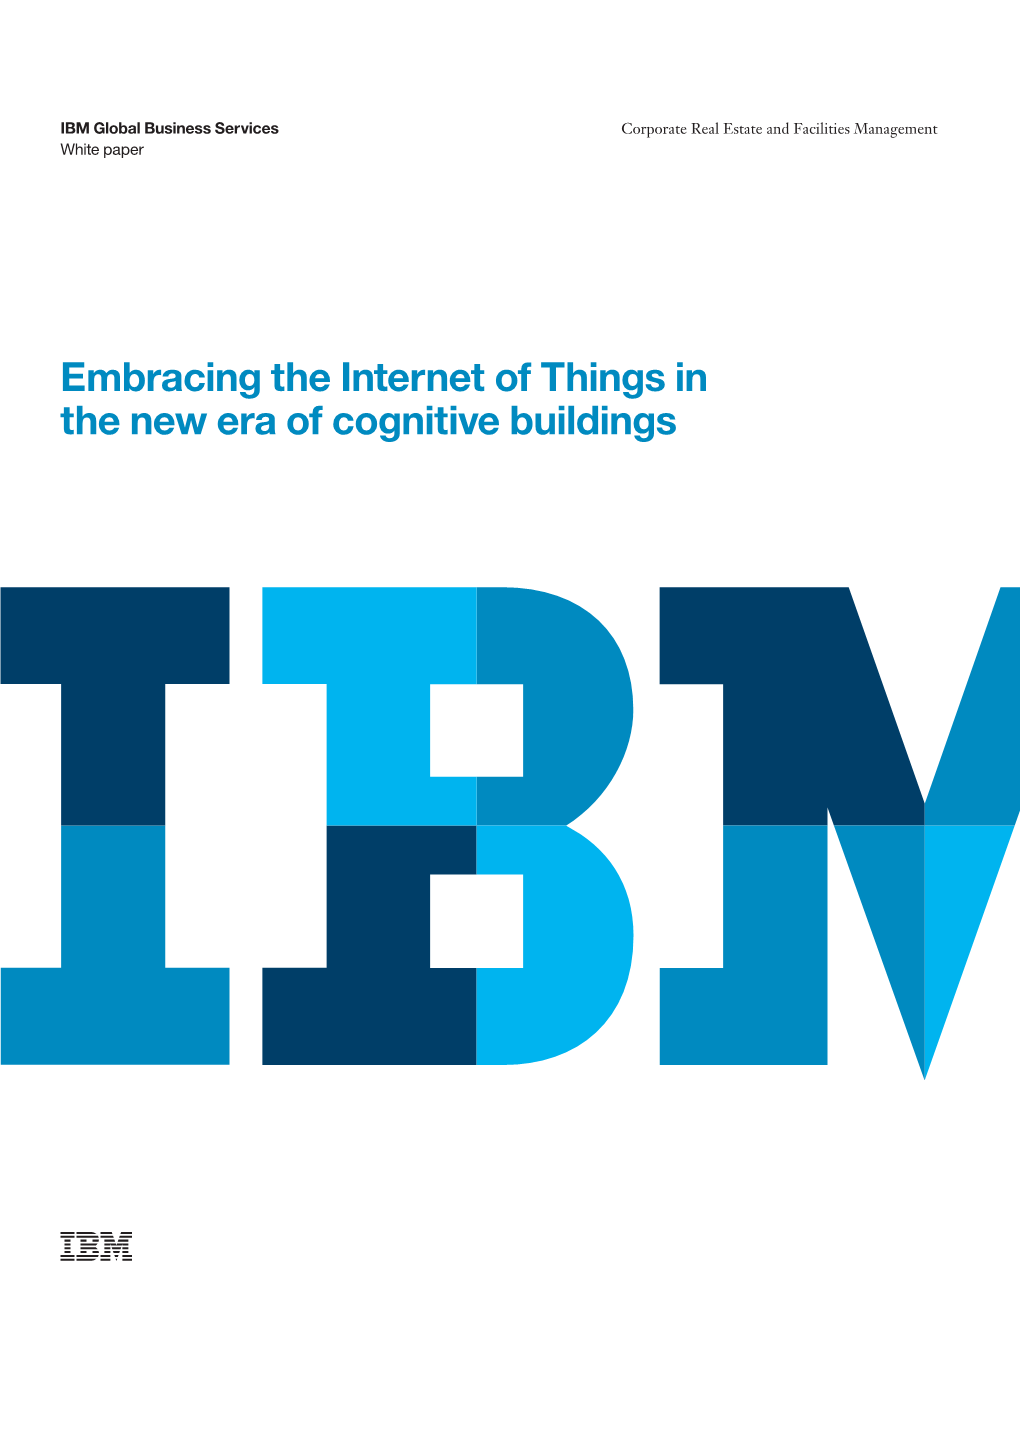 Embracing the Internet of Things in the New Era of Cognitive Buildings 2 Corporate Real Estate and Facilities Management